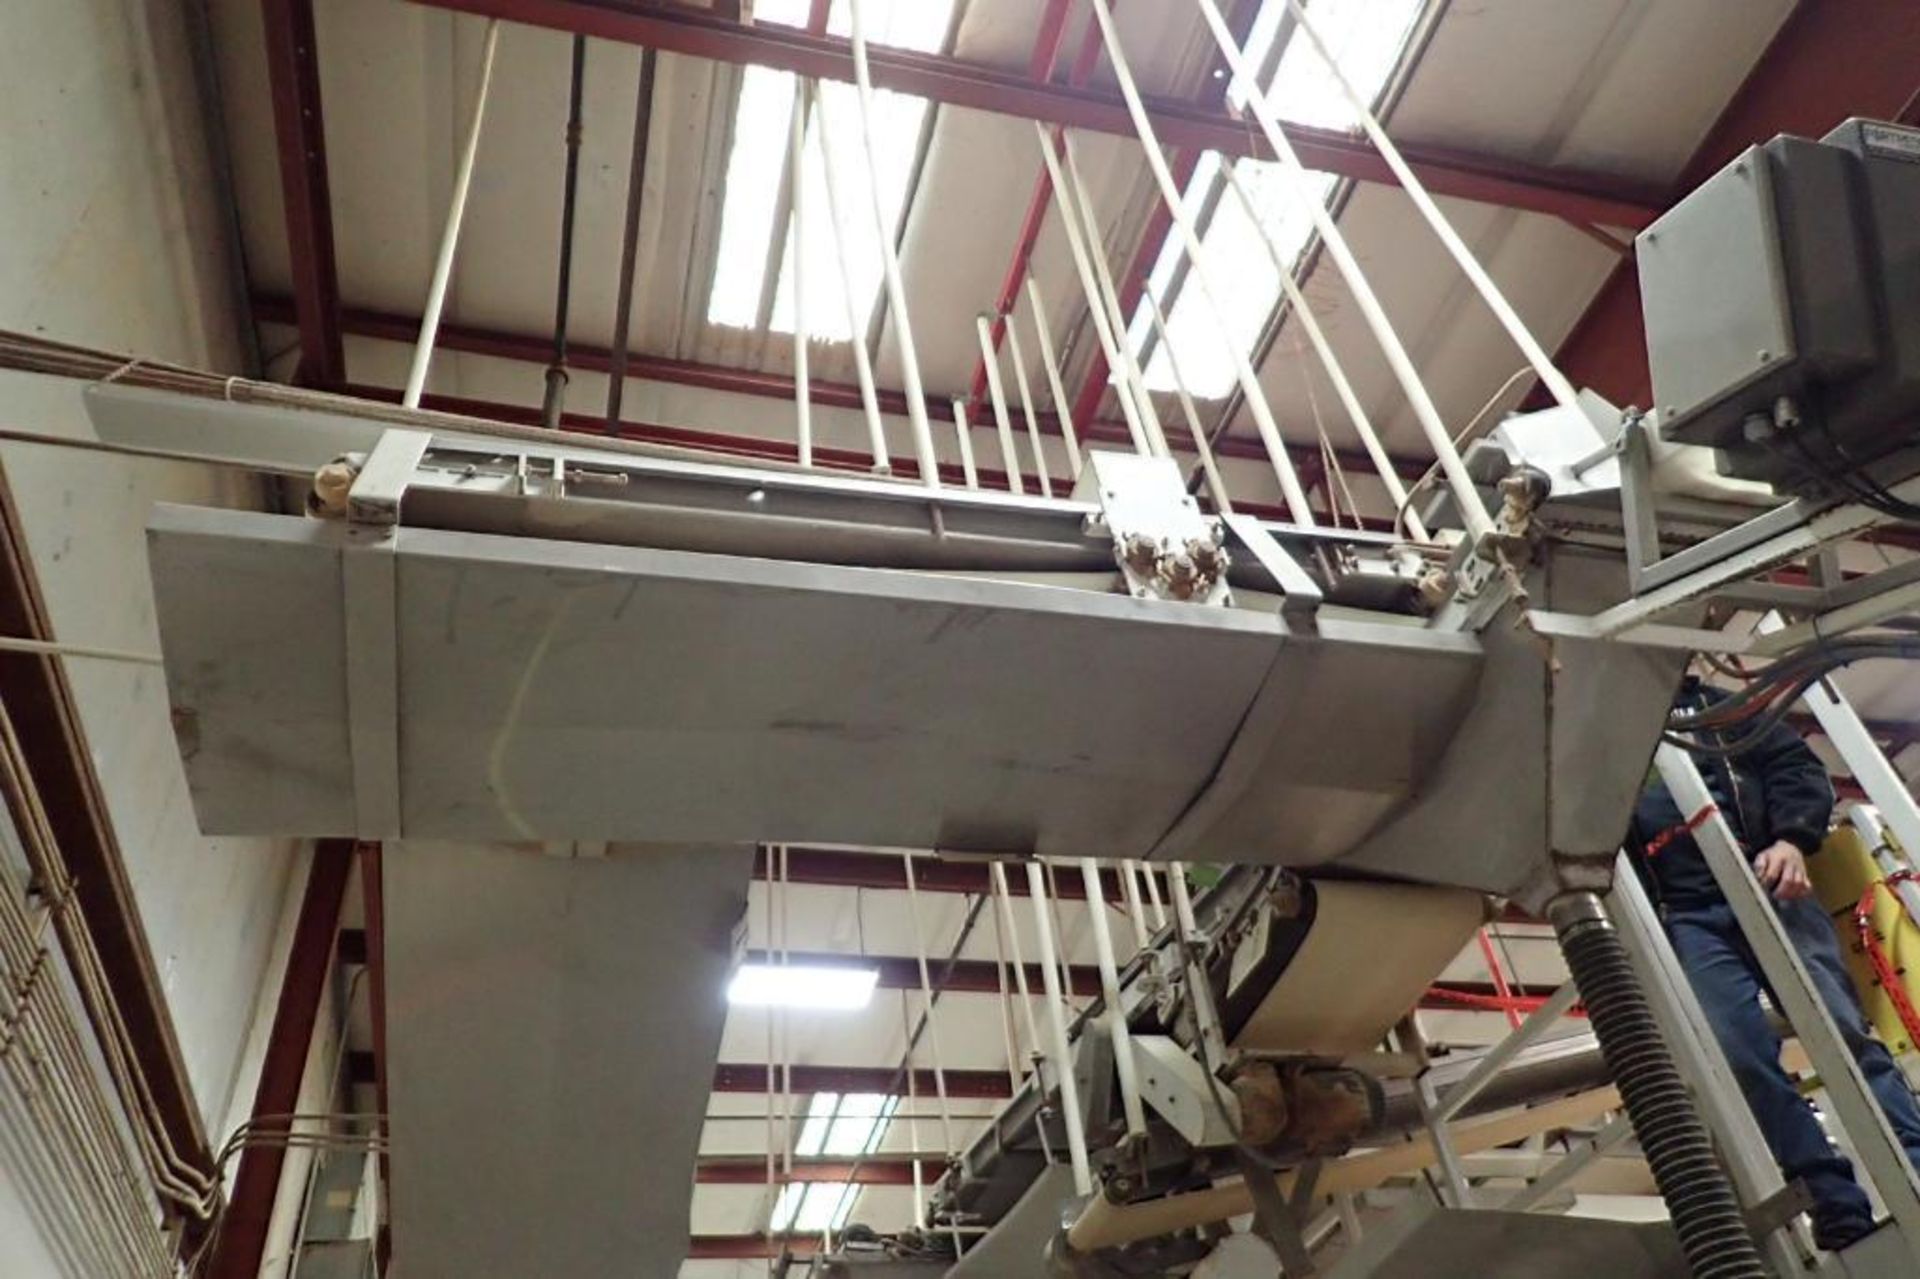 SS belt conveyor, 10 ft. long x 24 in. wide, suspended from ceiling, with motor and drive. **Rigging - Image 2 of 3